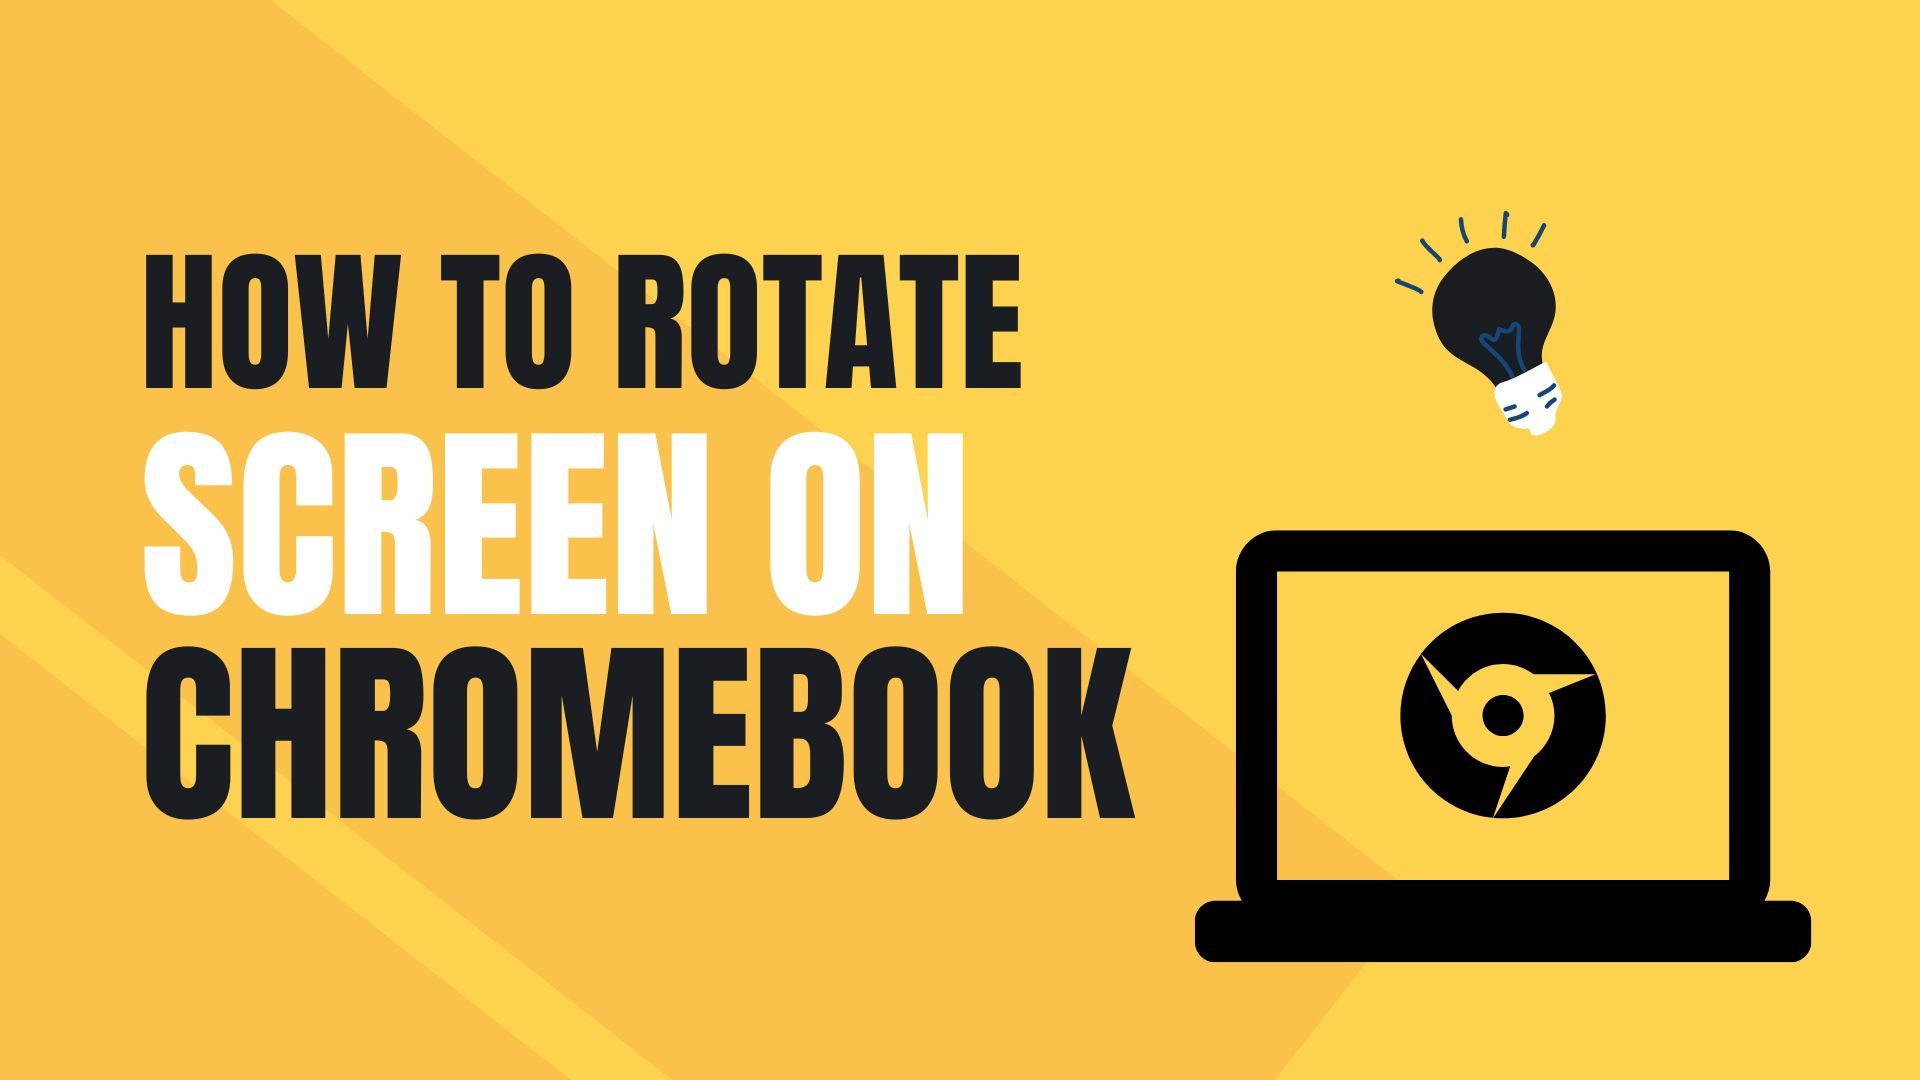 3 Ways to Rotate the Screen on a Chromebook